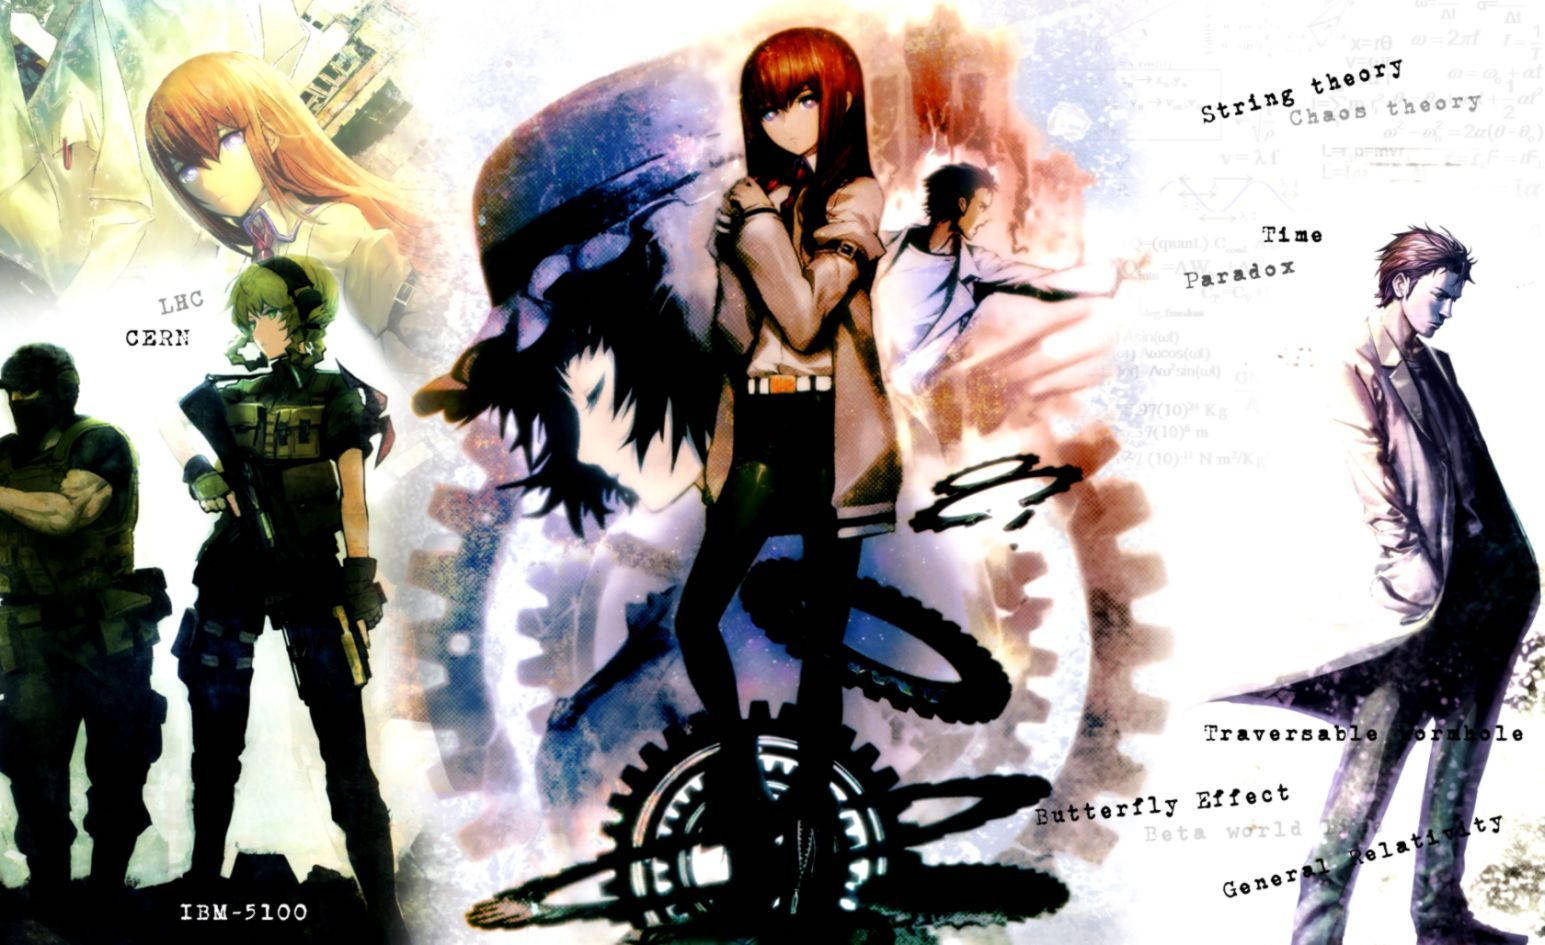 Brilliant minds of Kurisu Makise and the Team from Steins Gate Wallpaper